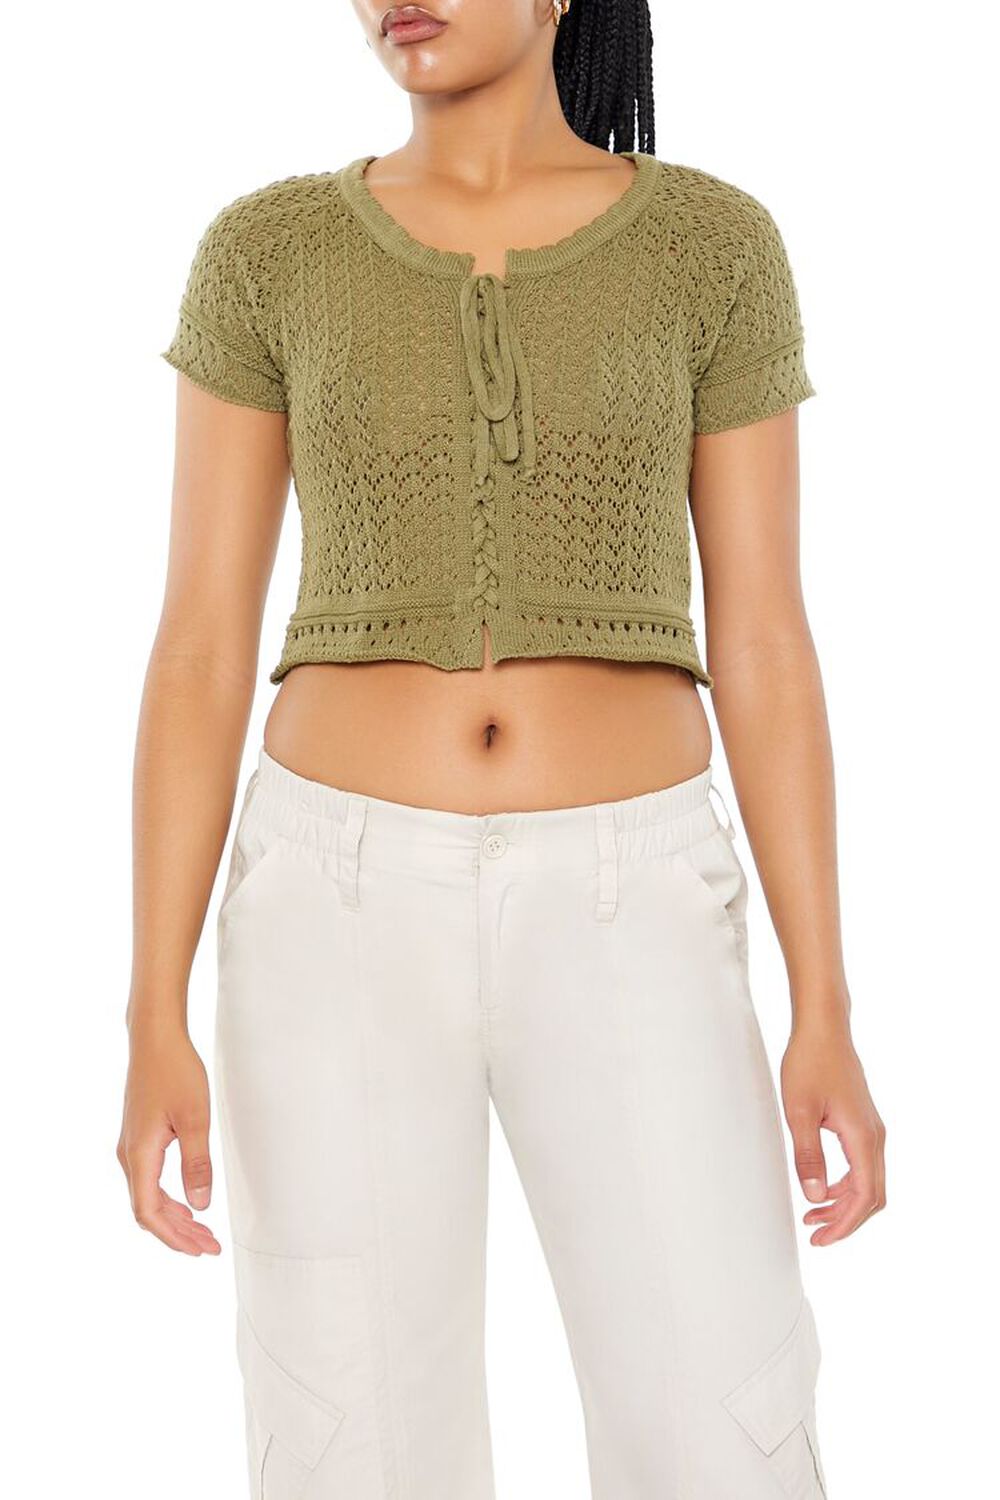 OLIVE Sweater-Knit Crochet Crop Top, image 1